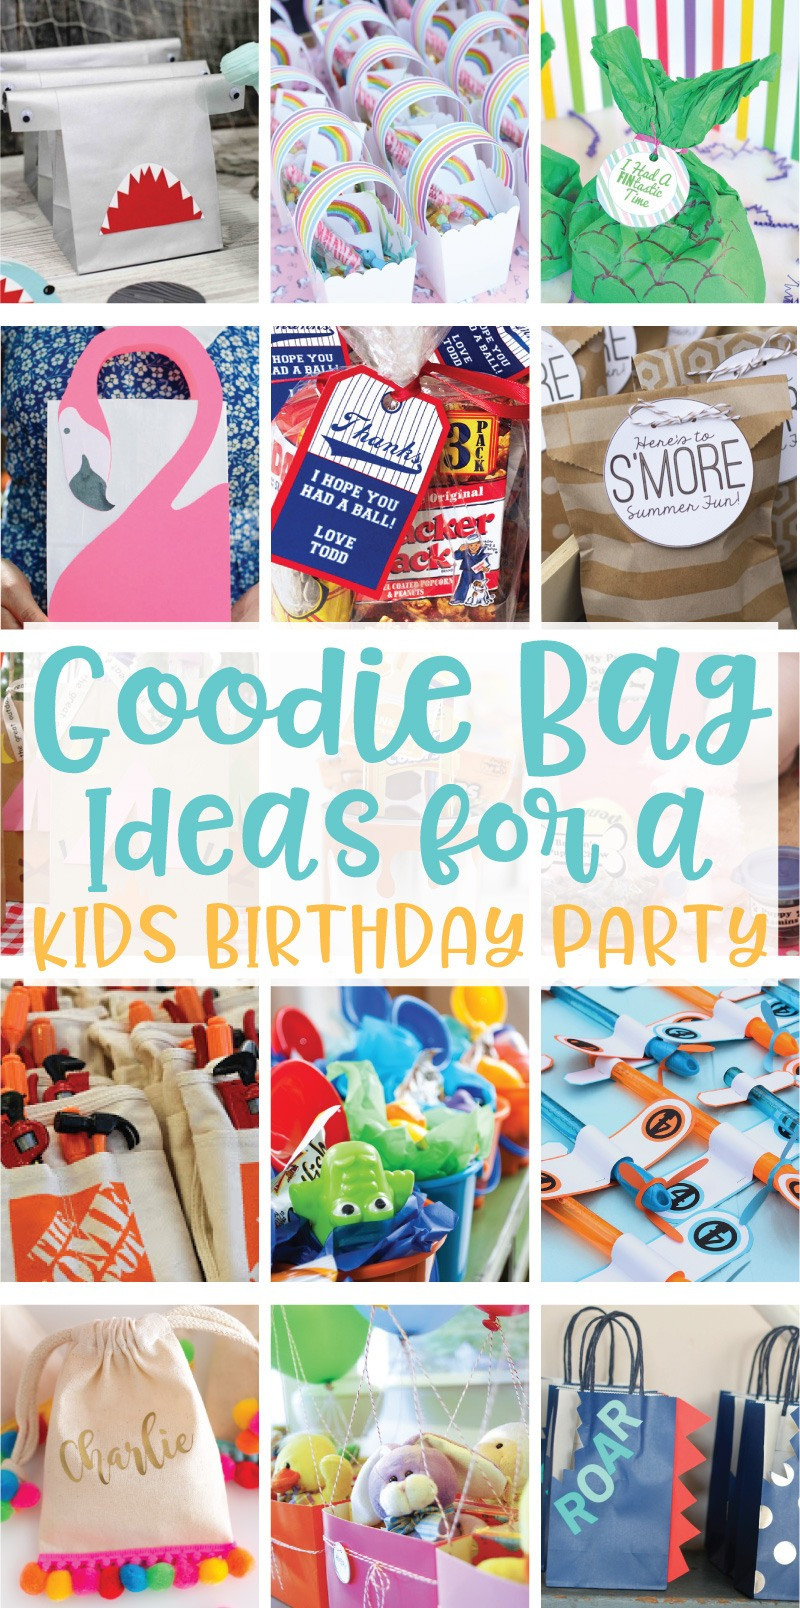 Kids Party Gift Bag Ideas
 20 Creative Goo Bag Ideas for Kids Birthday Parties on